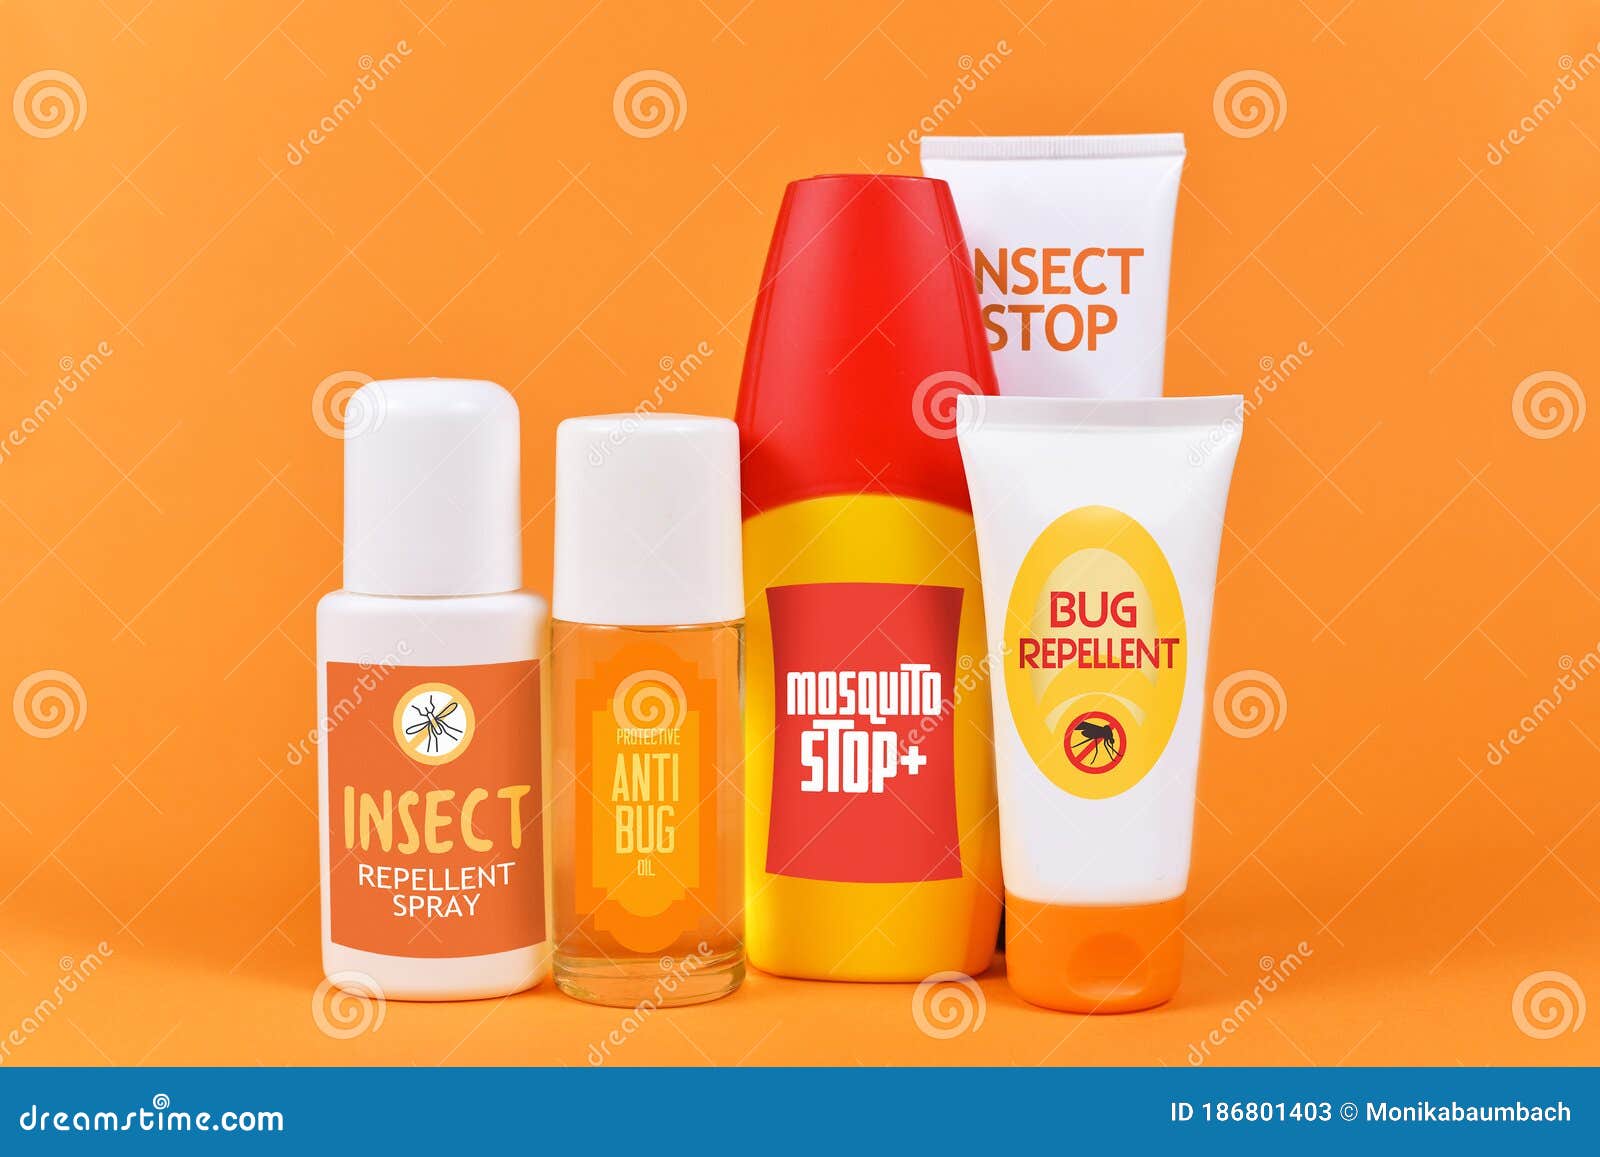 various bottles and tubes with insect repellent products with made up labels